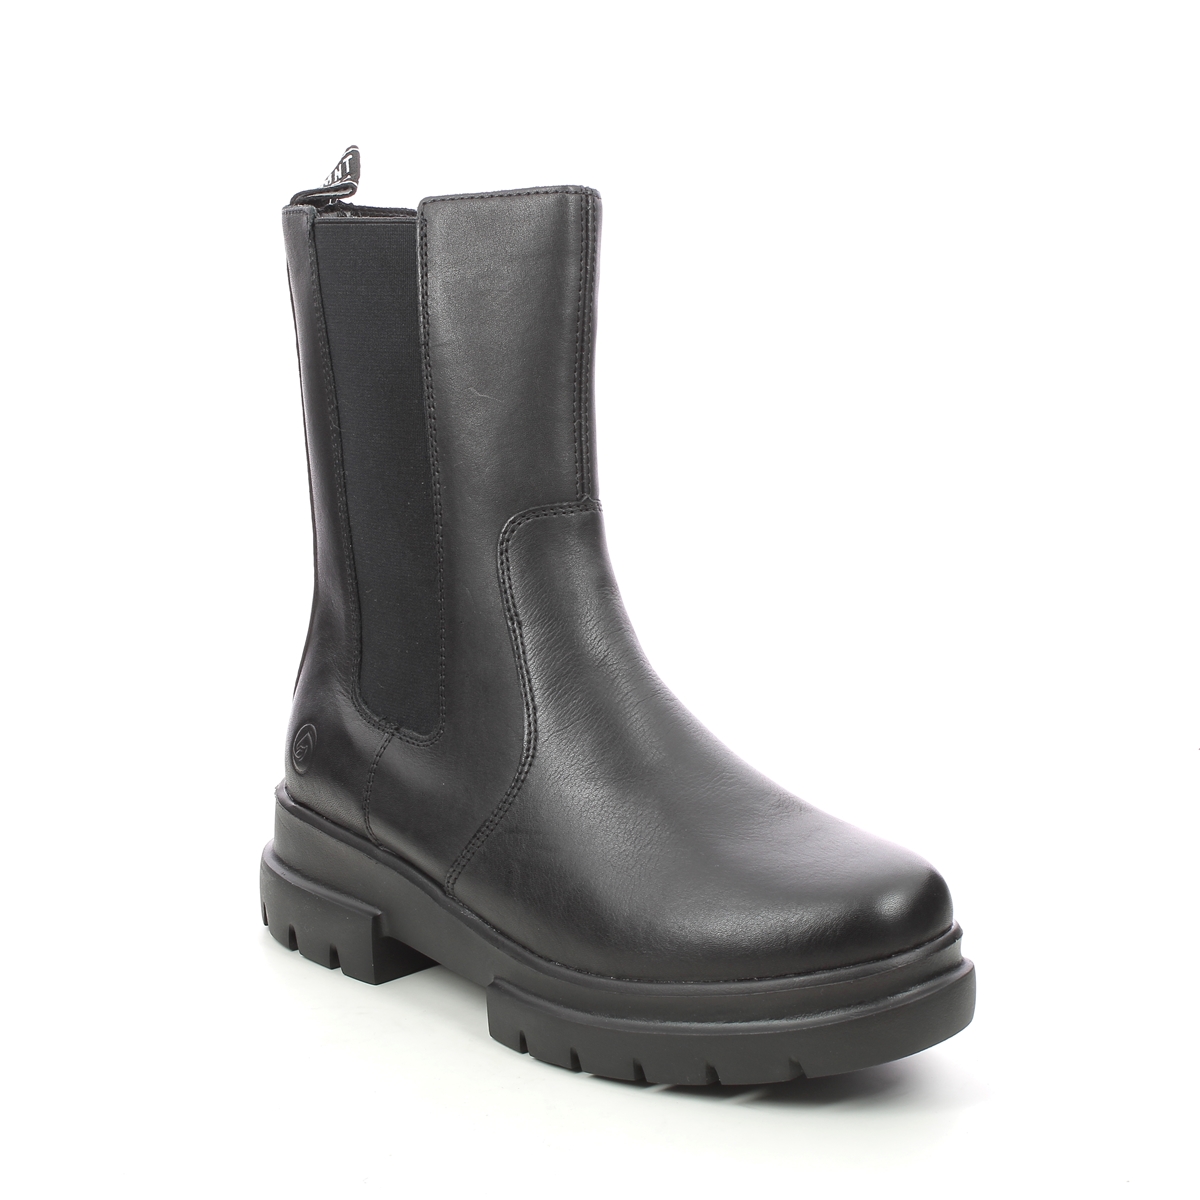 Remonte Chunky Chelsea Black Leather Womens Chelsea Boots D8971-01 In Size 38 In Plain Black Leather